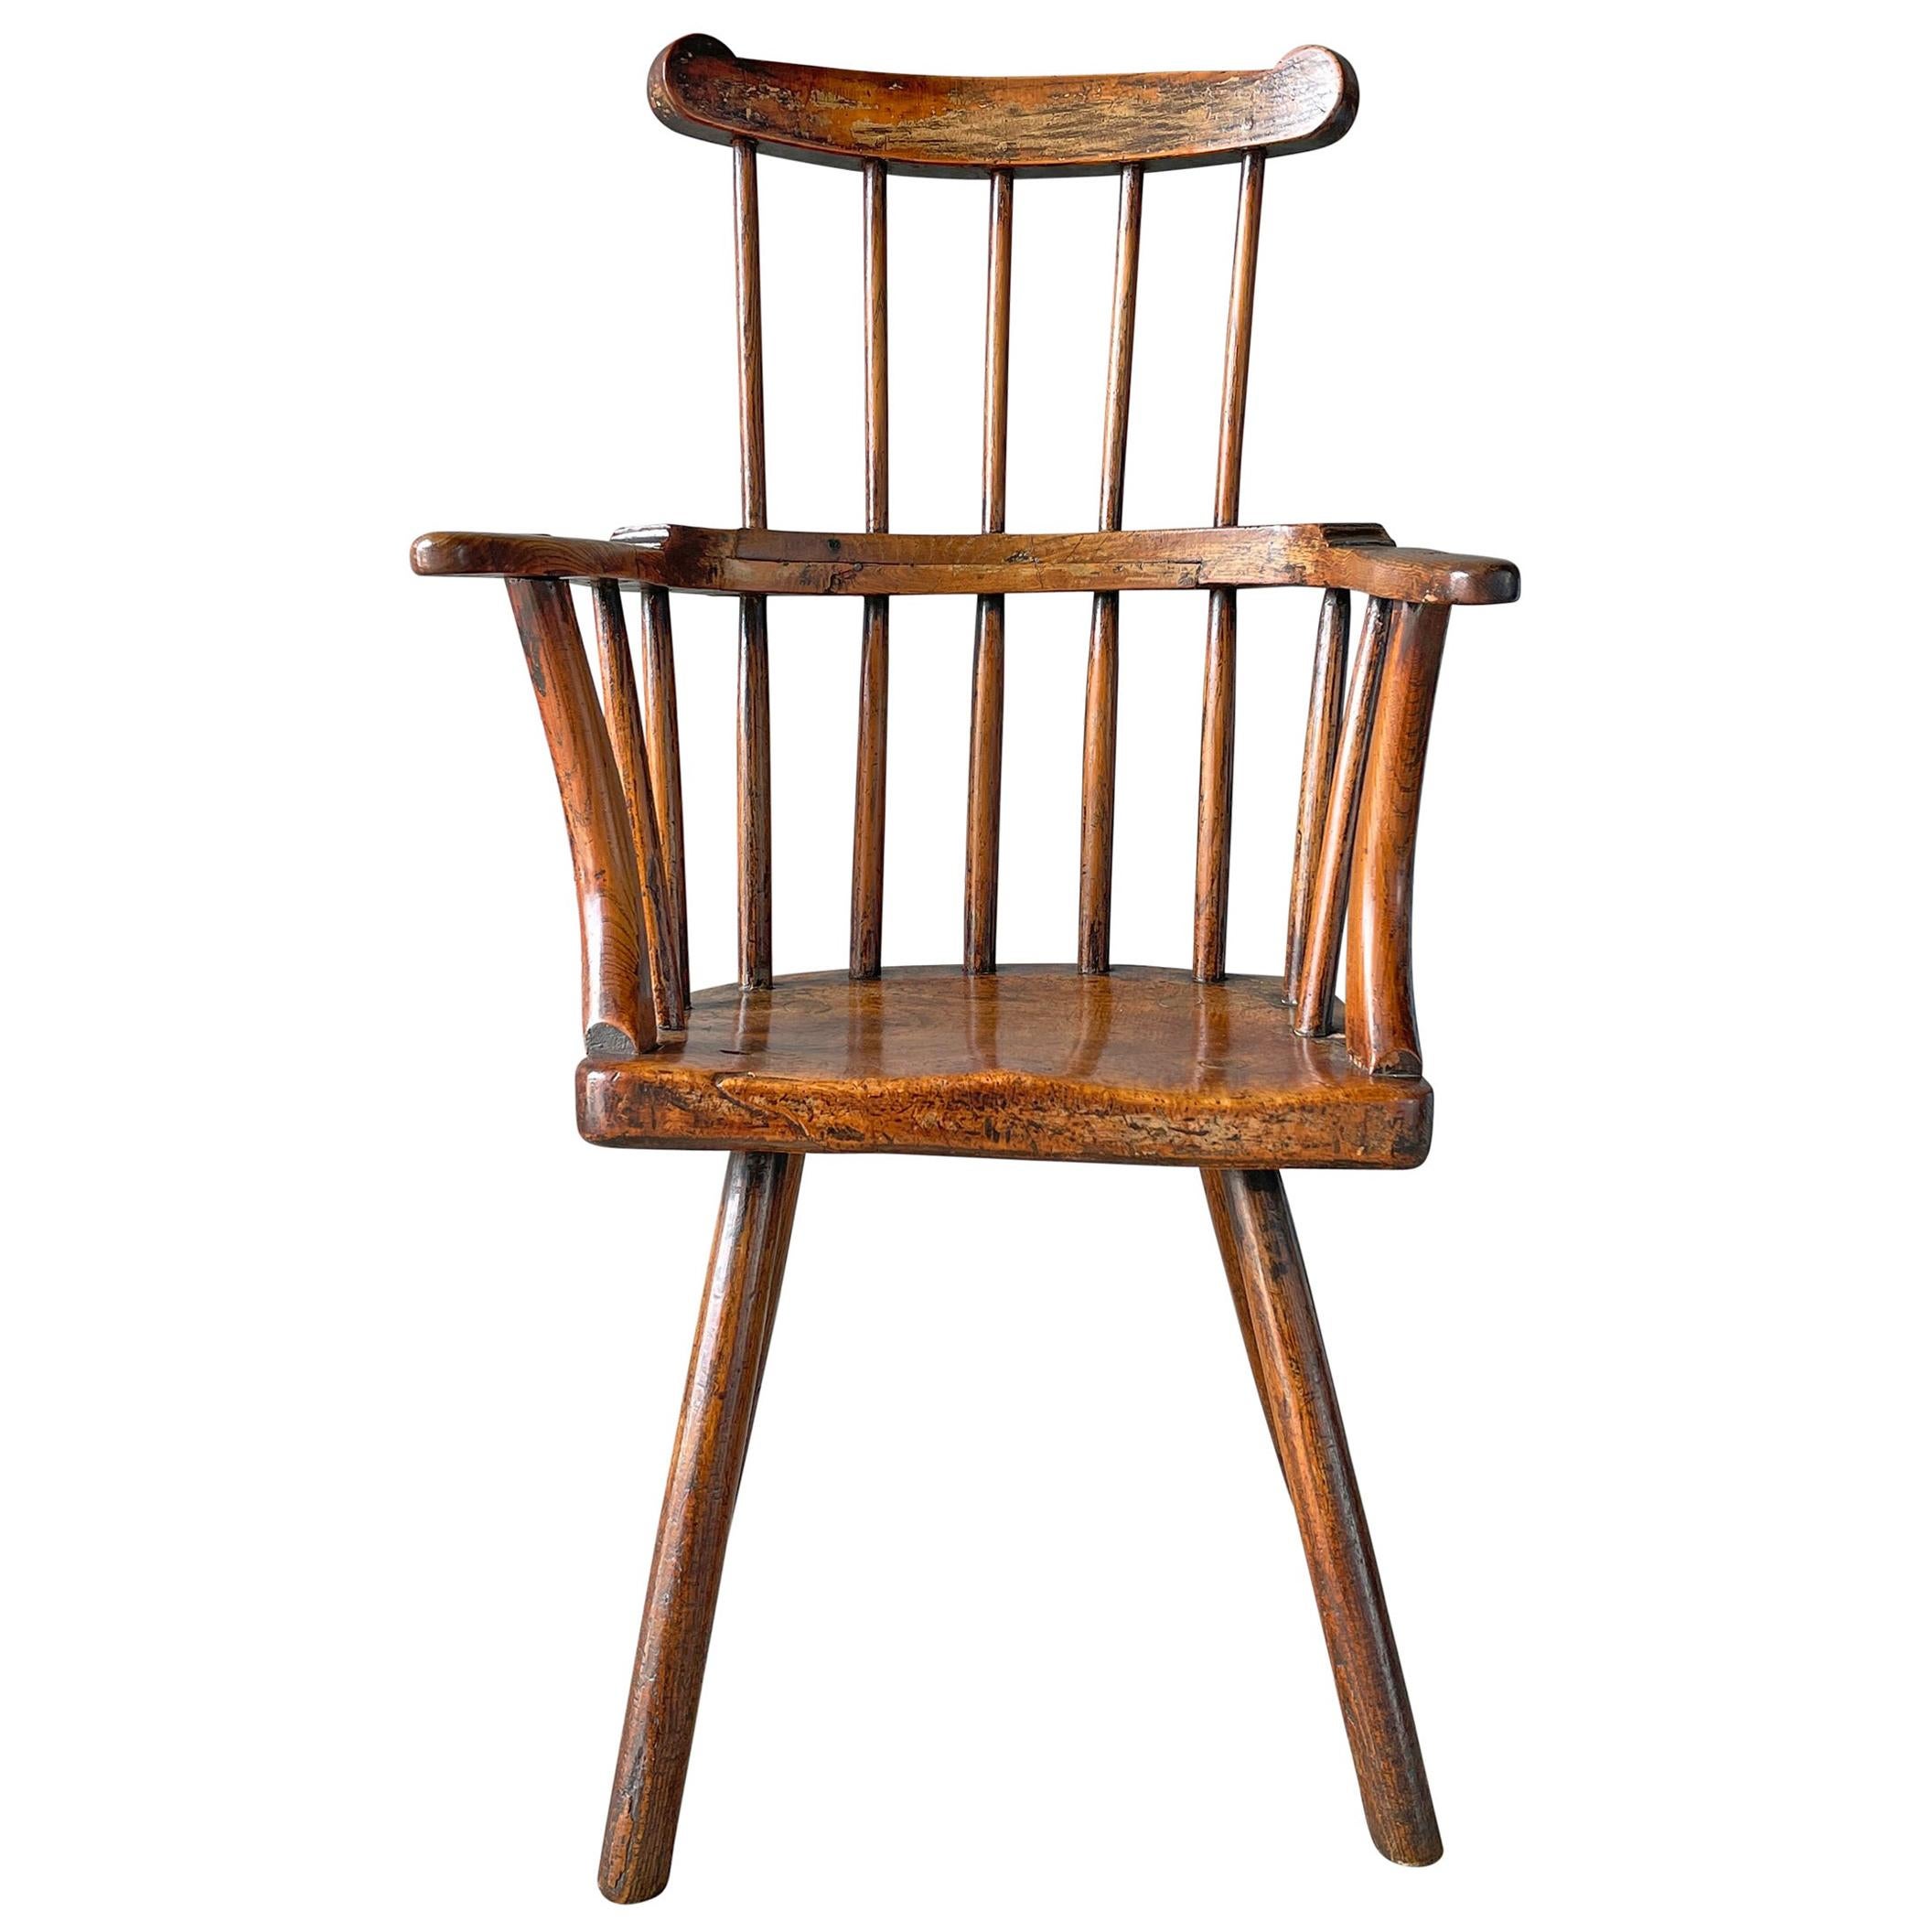 18th Century Welsh Stick Chair